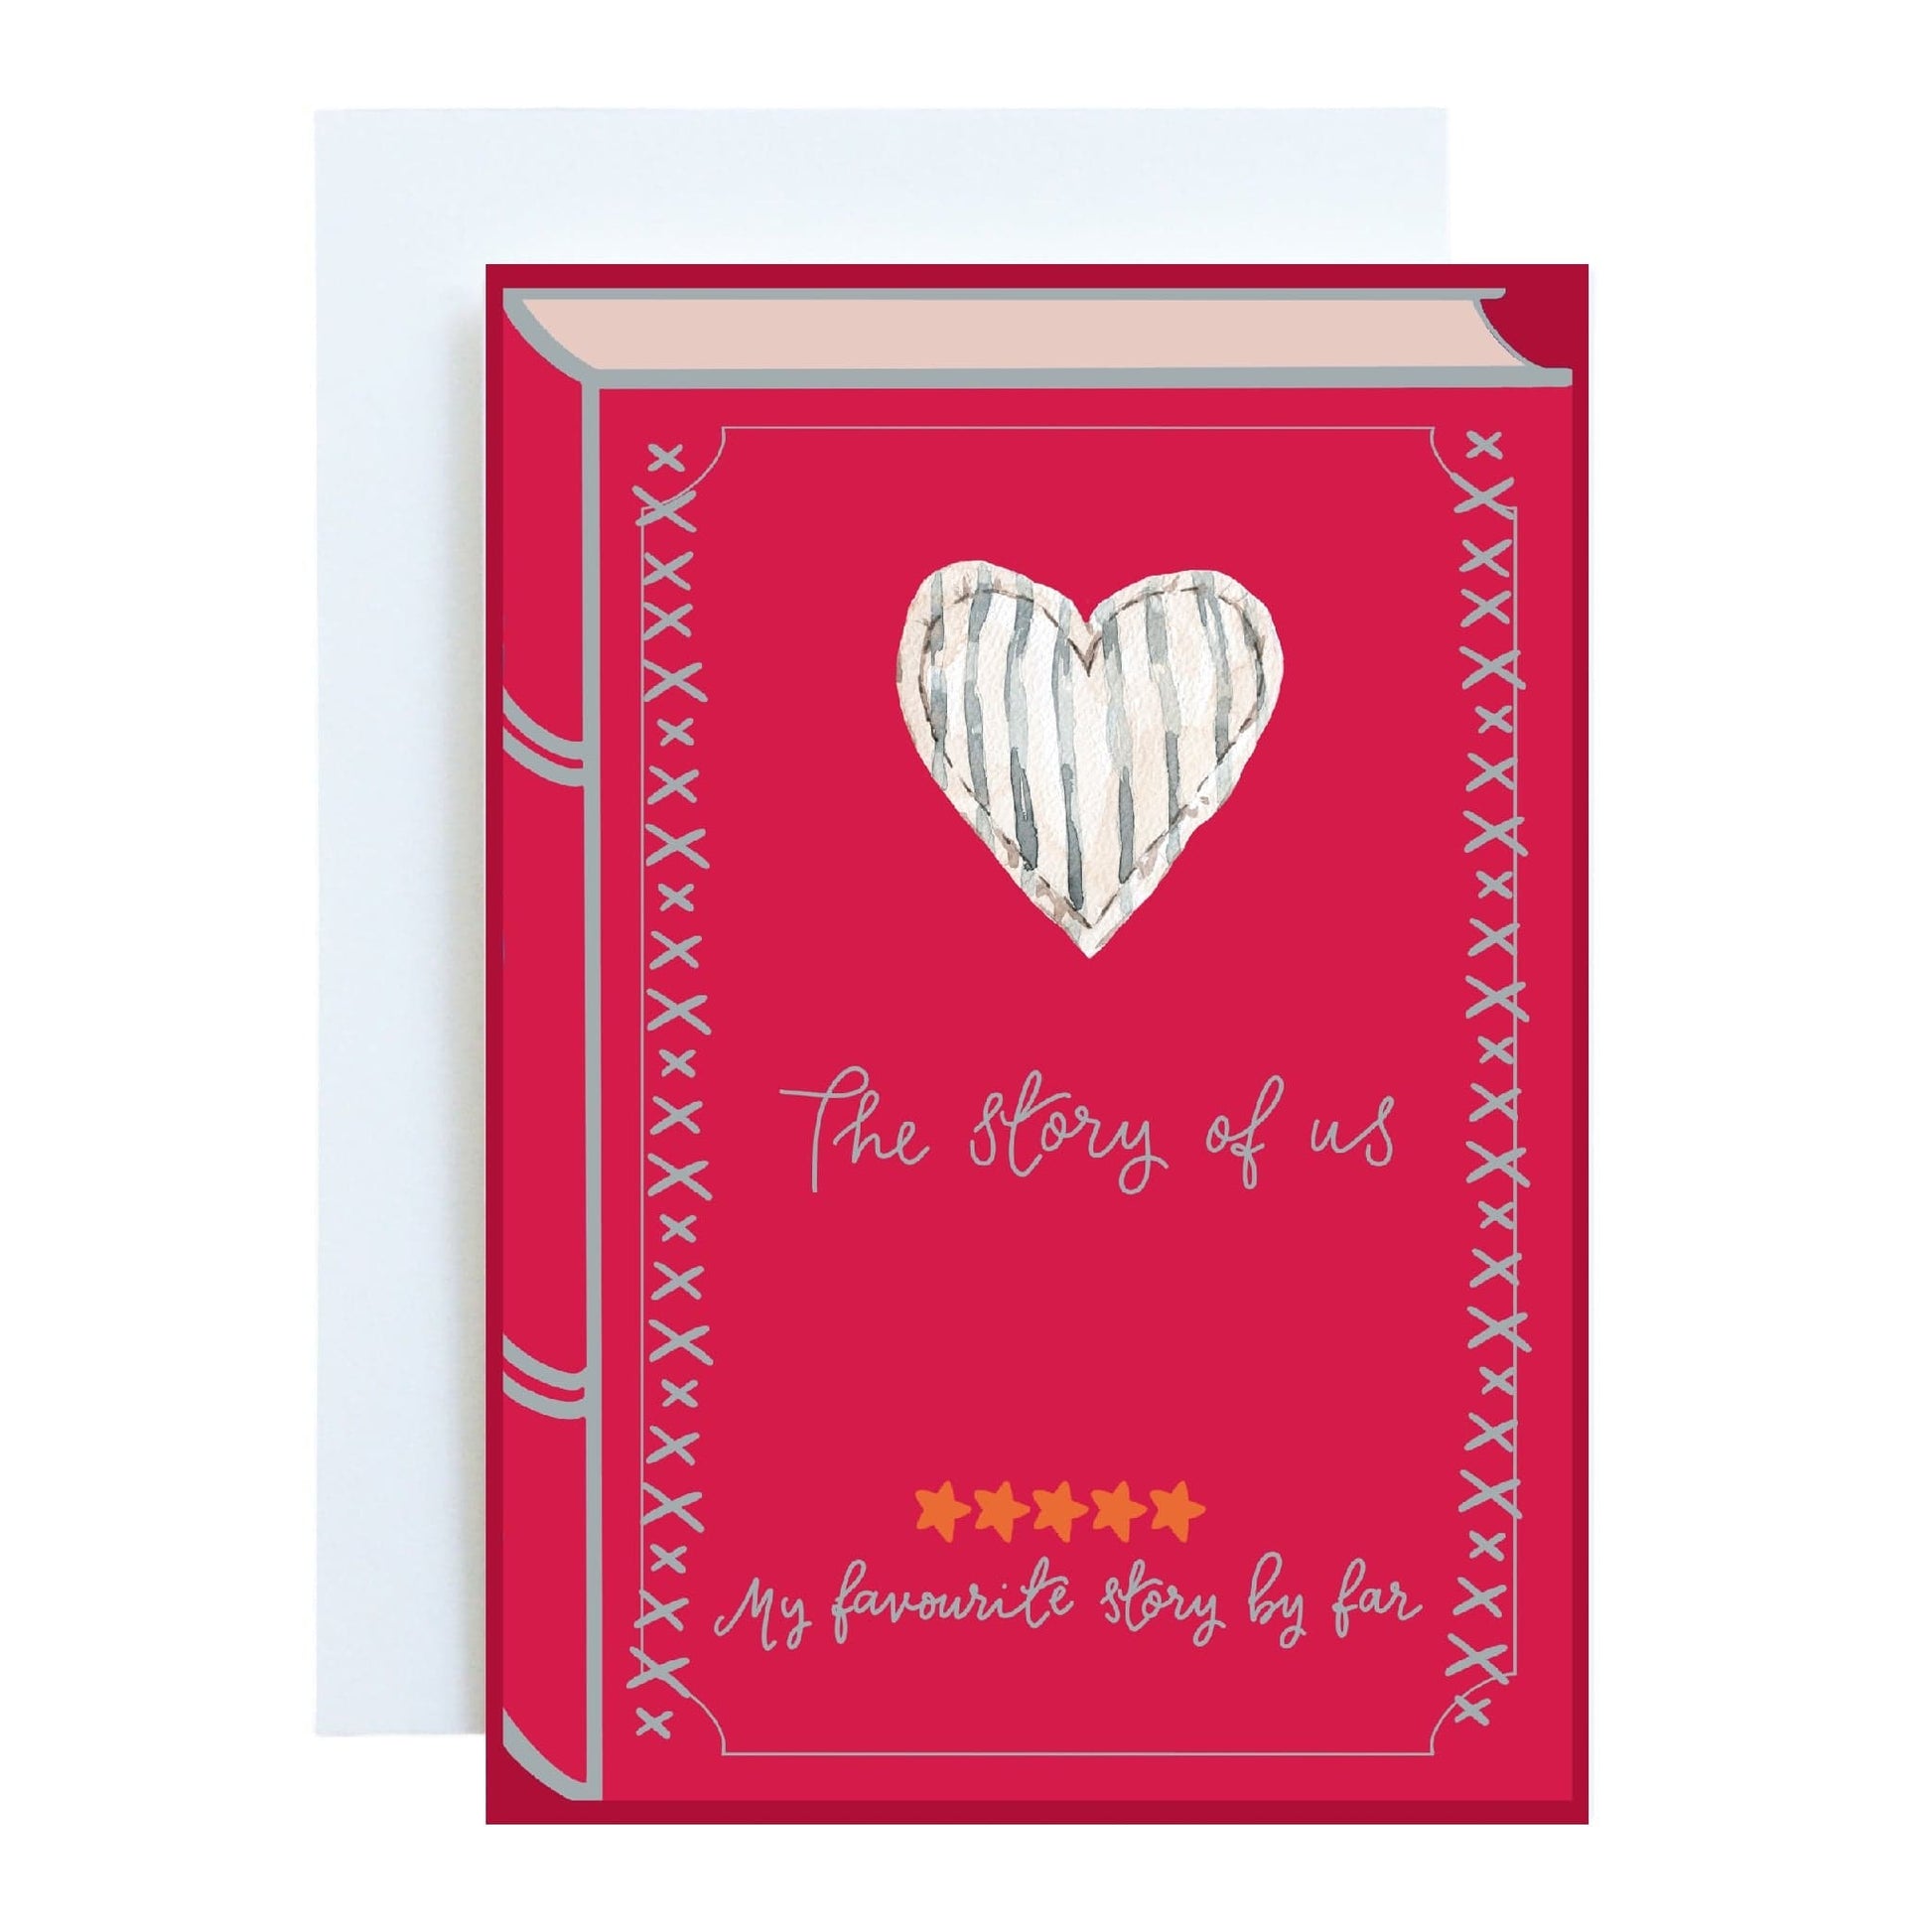 And Hope Designs Cards Book greeting card - The story of us